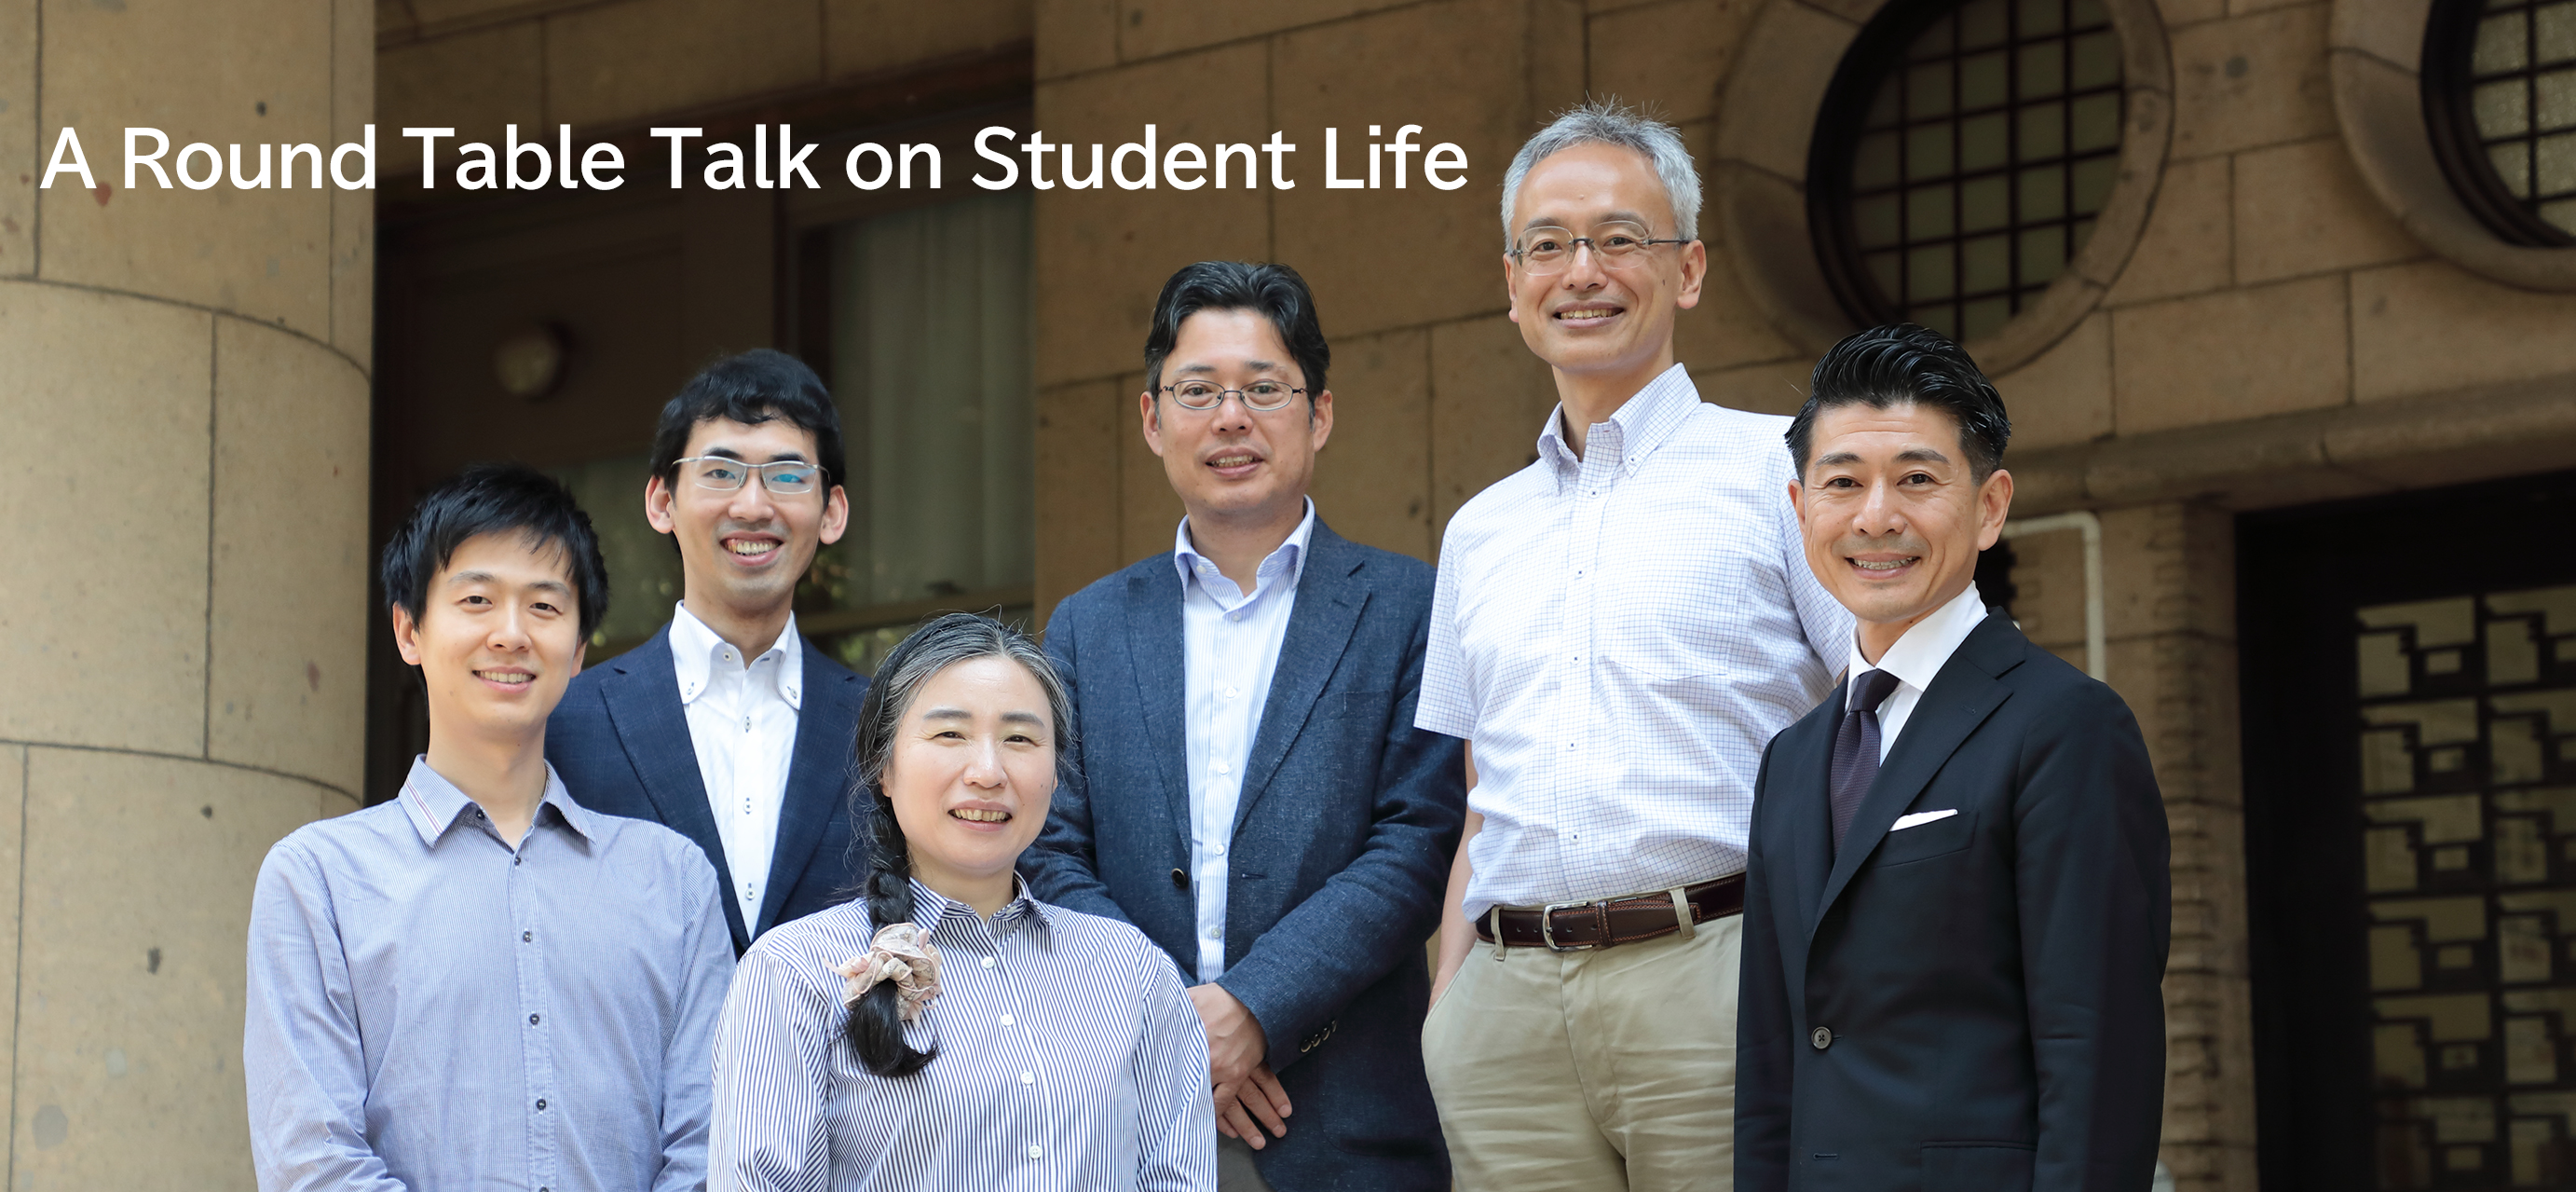 A Round Table Talk on Student Life 2019